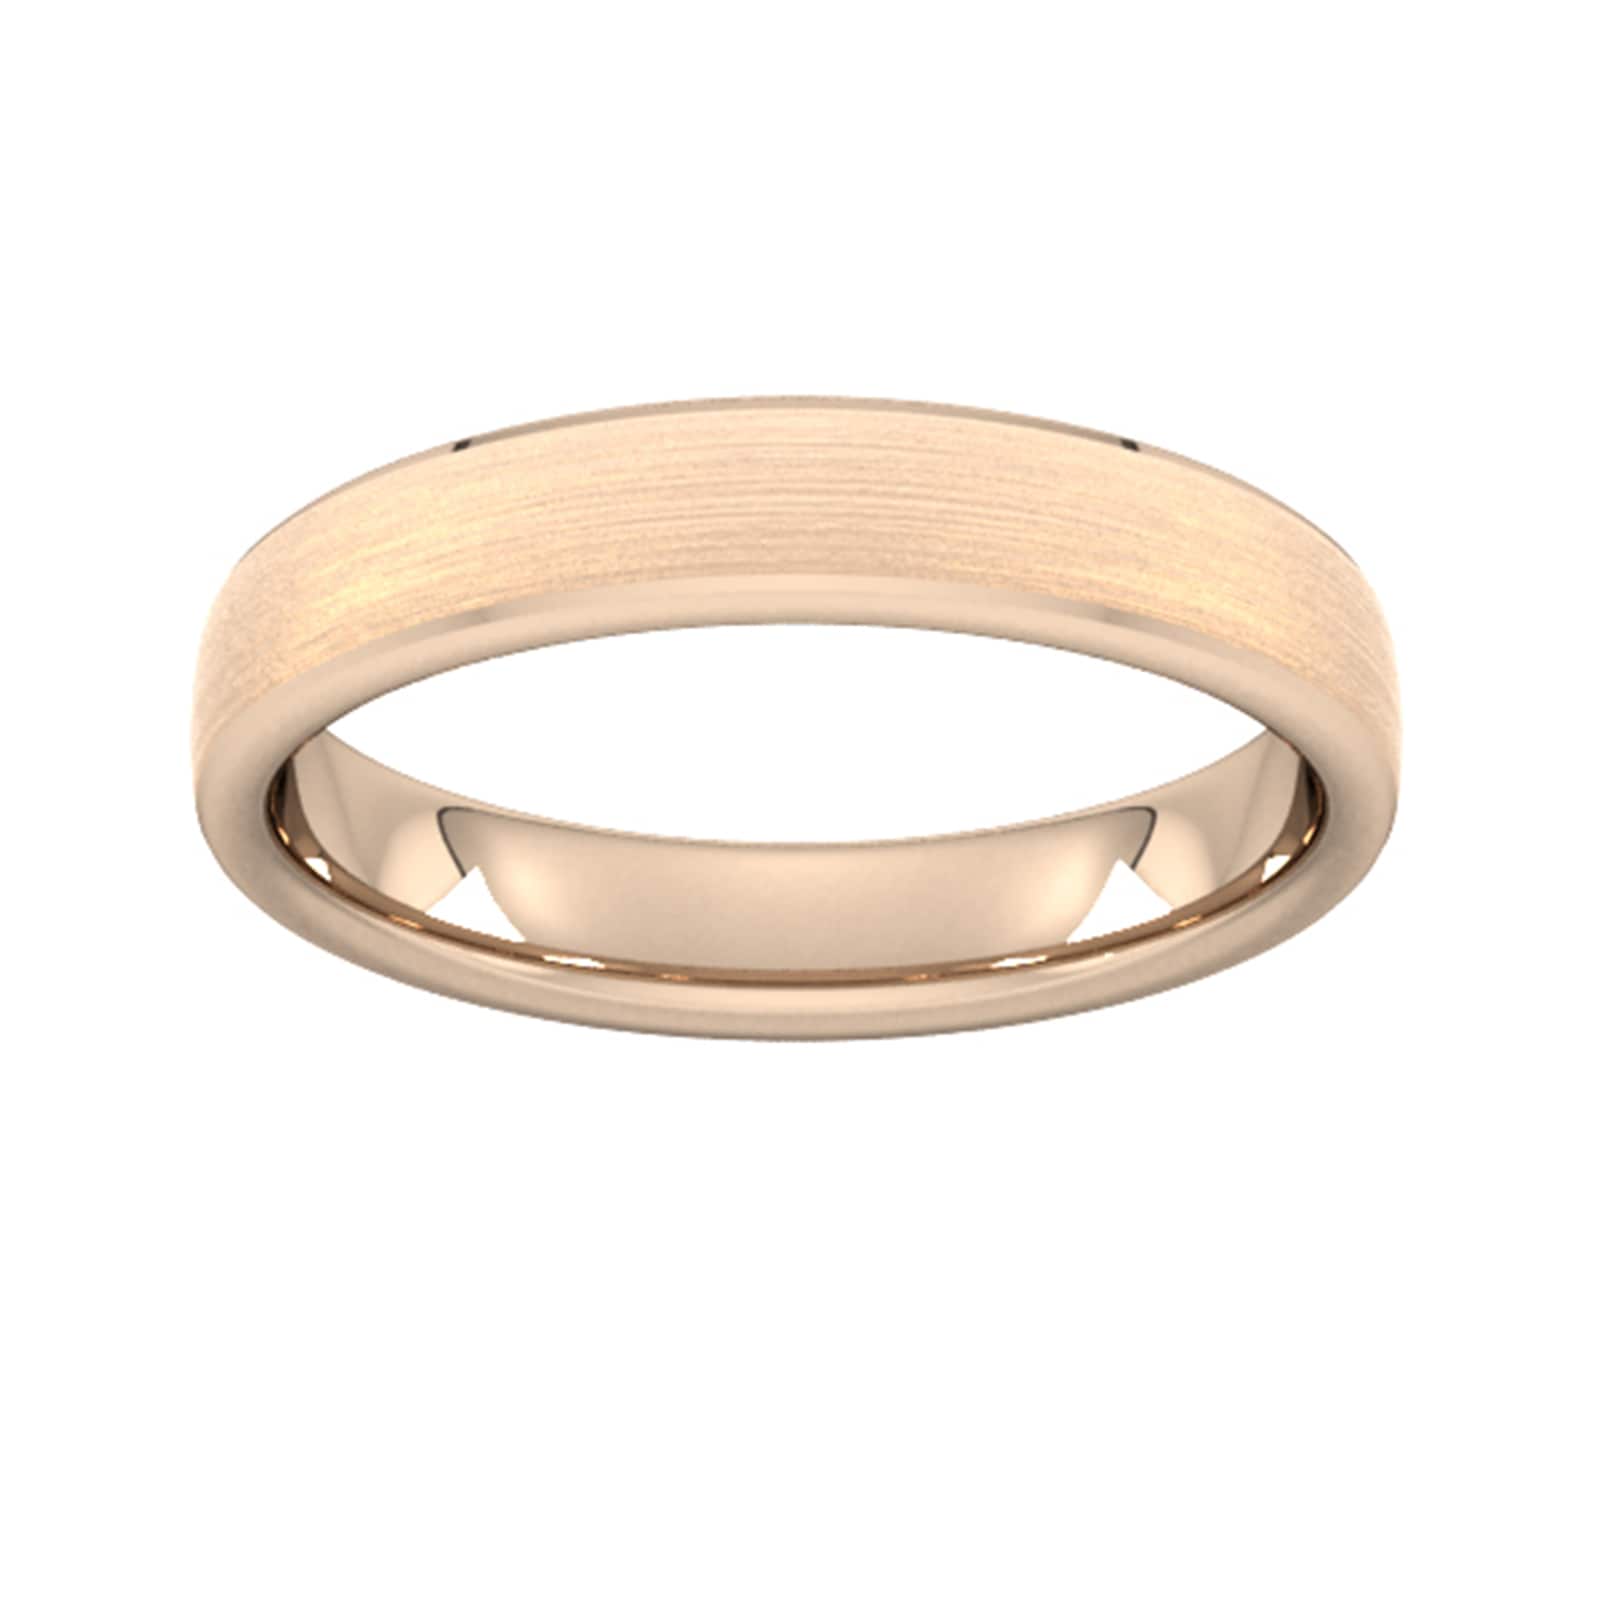 4mm Slight Court Extra Heavy Polished Chamfered Edges With Matt Centre Wedding Ring In 18 Carat Rose Gold - Ring Size H